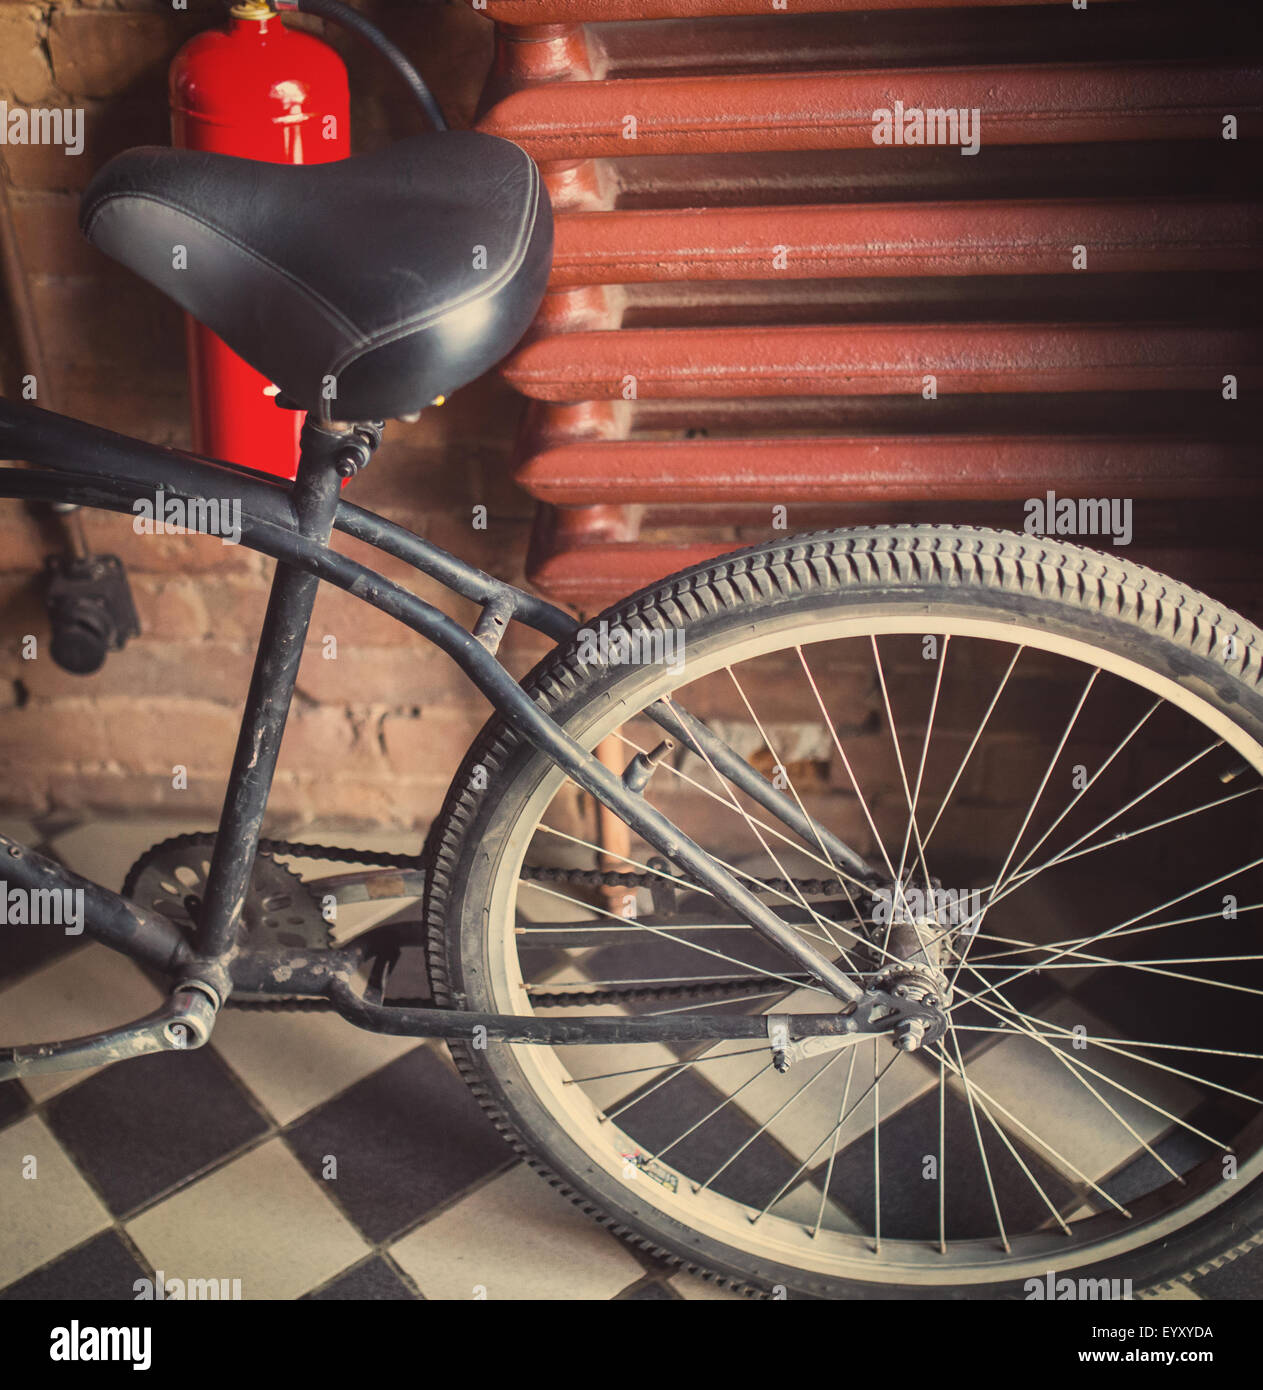 Old retro style, fixed gear bicycle, tinted photo Stock Photo